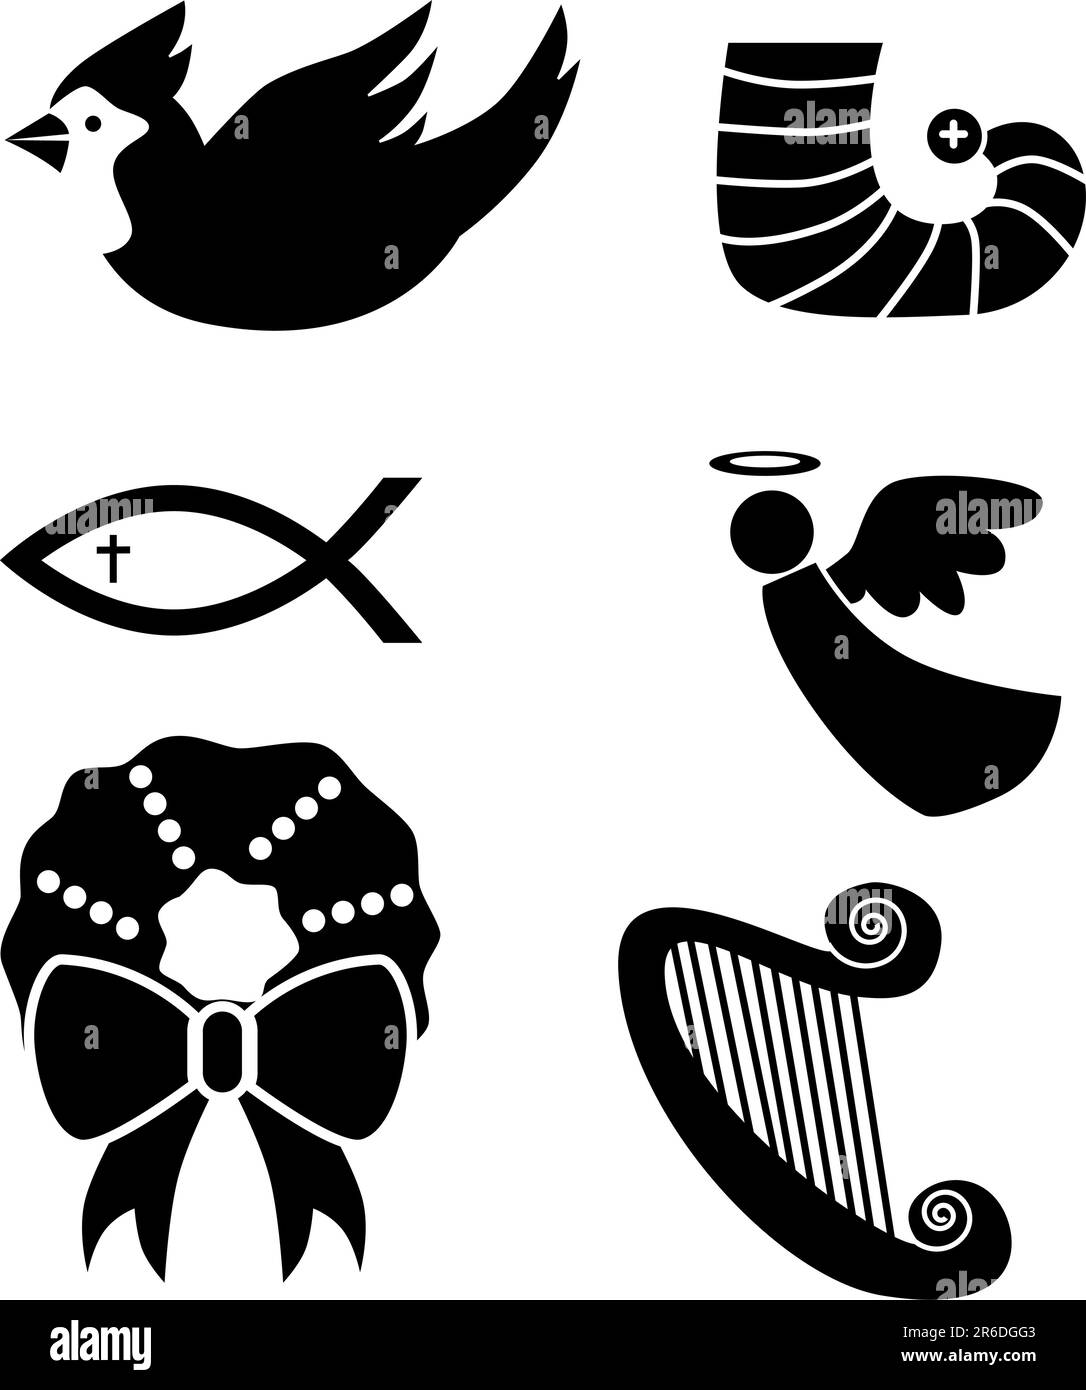 Set of 6 holiday icons in black. Stock Vector